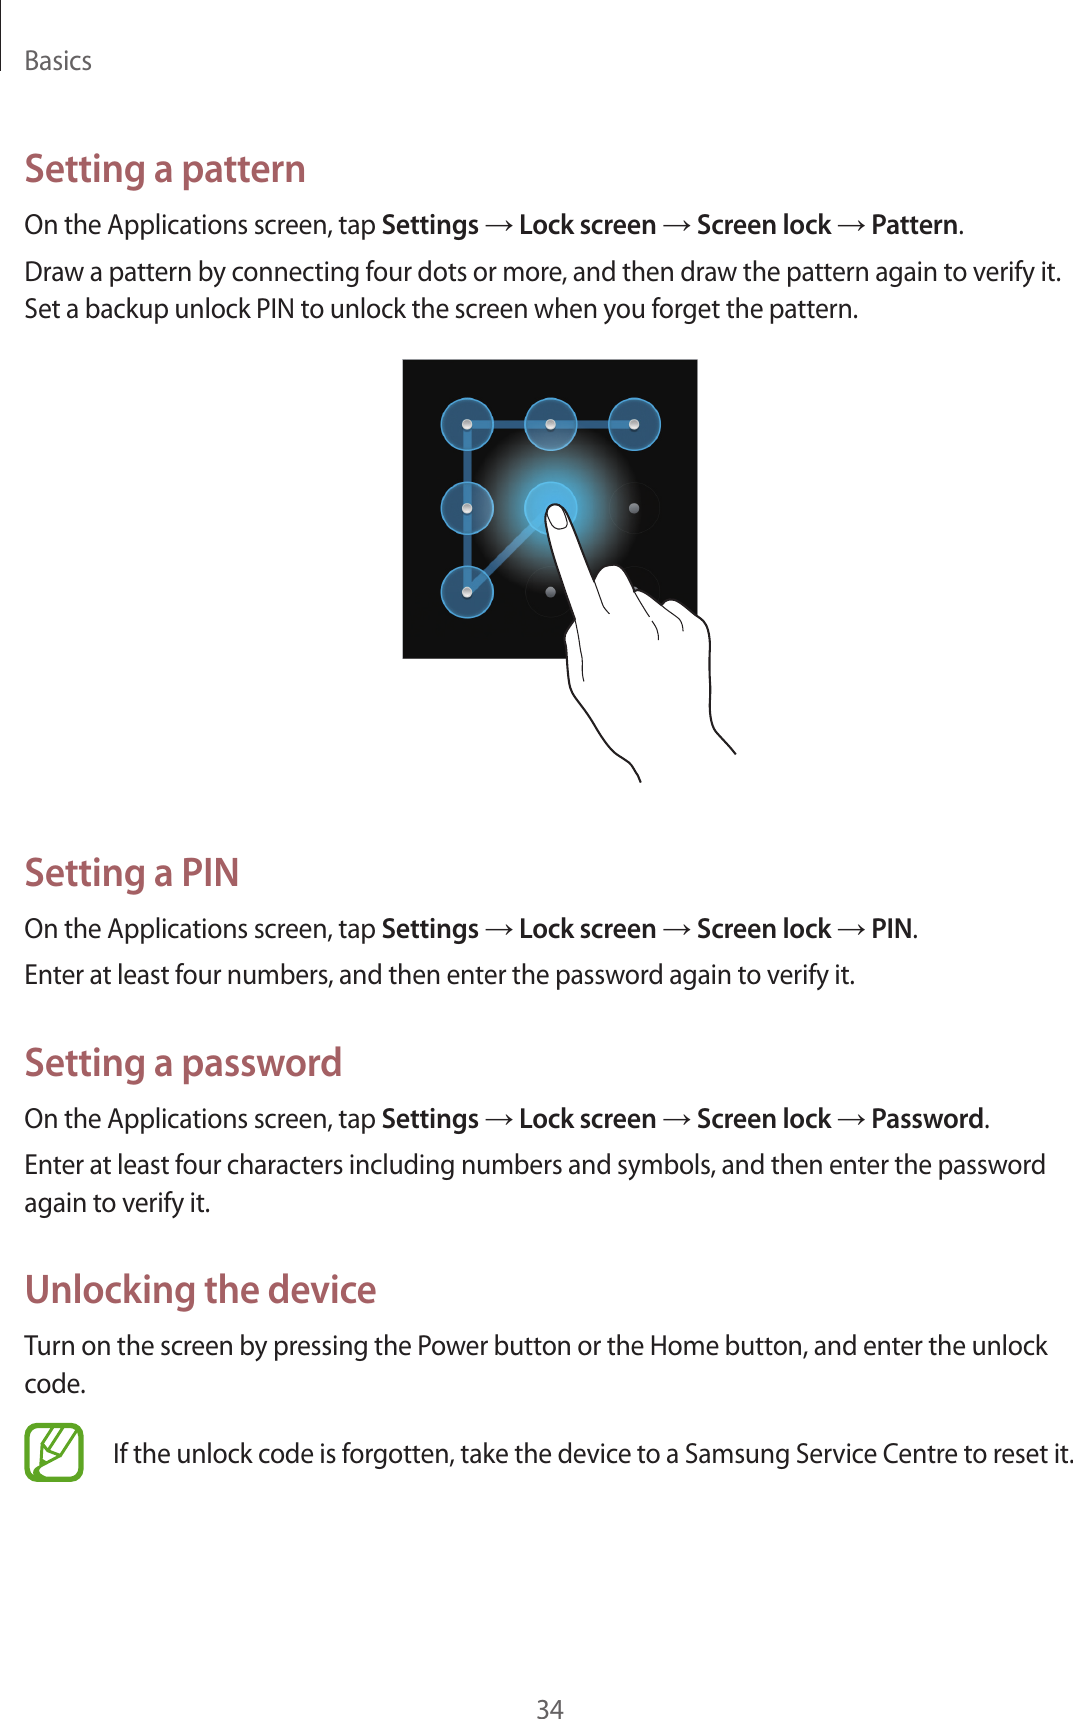 Basics34Setting a patternOn the Applications screen, tap Settings → Lock screen → Screen lock → Pattern.Draw a pattern by connecting four dots or more, and then draw the pattern again to verify it. Set a backup unlock PIN to unlock the screen when you forget the pattern.Setting a PINOn the Applications screen, tap Settings → Lock screen → Screen lock → PIN.Enter at least four numbers, and then enter the password again to verify it.Setting a passwordOn the Applications screen, tap Settings → Lock screen → Screen lock → Password.Enter at least four characters including numbers and symbols, and then enter the password again to verify it.Unlocking the deviceTurn on the screen by pressing the Power button or the Home button, and enter the unlock code.If the unlock code is forgotten, take the device to a Samsung Service Centre to reset it.